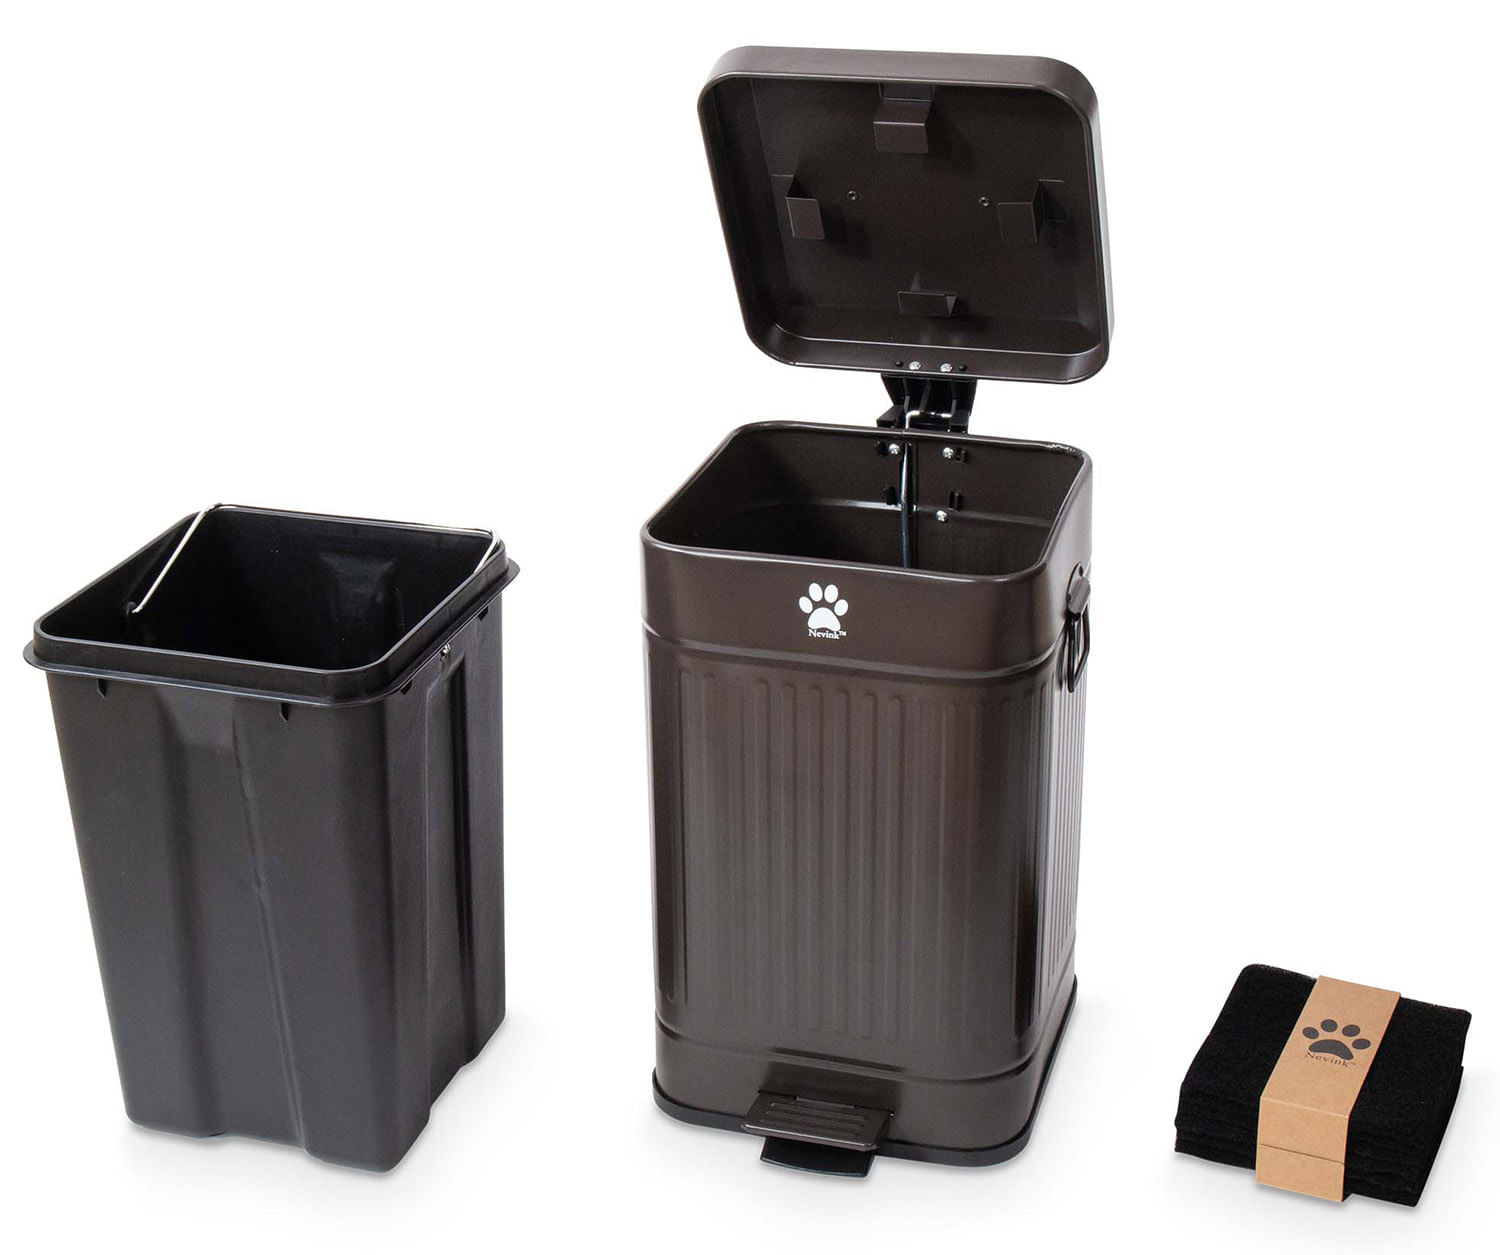 PortoTrash: Portable Trash Can for Home, RV, Camping, Outdoors